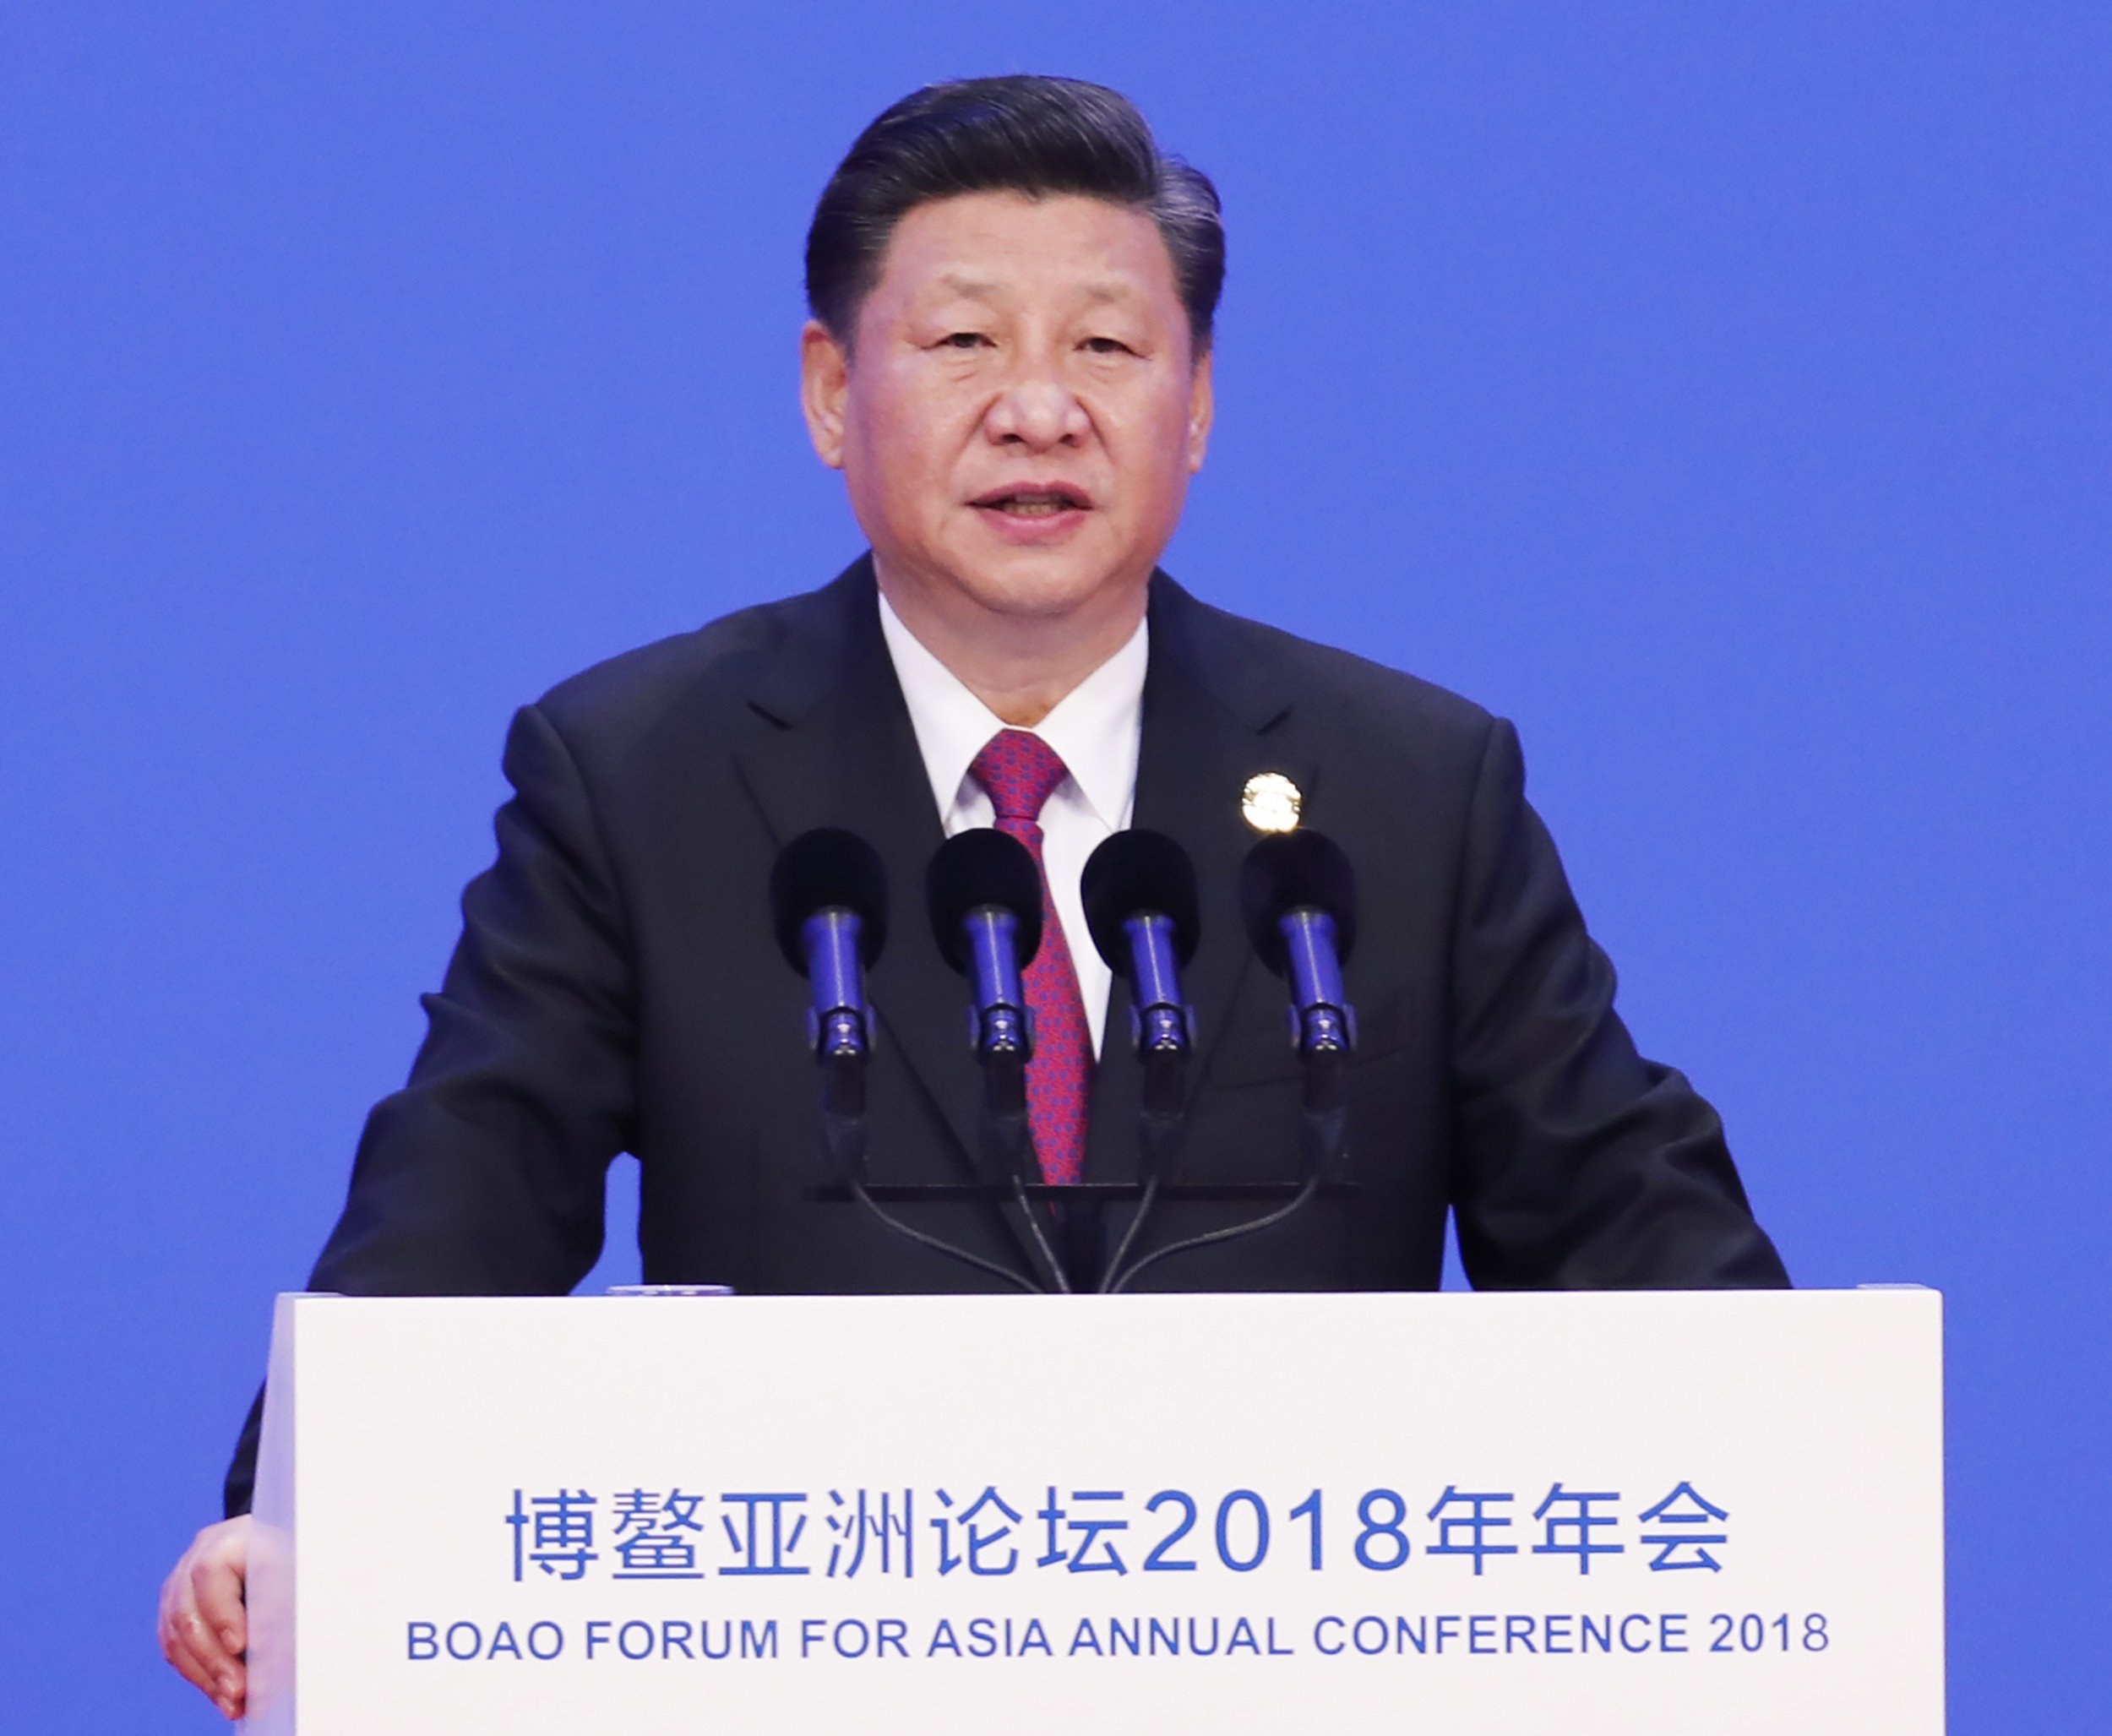 G. Bin Zhao says the strengthening of Xi Jinping’s leadership will make further reform and opening possible – by removing the obstacles to change